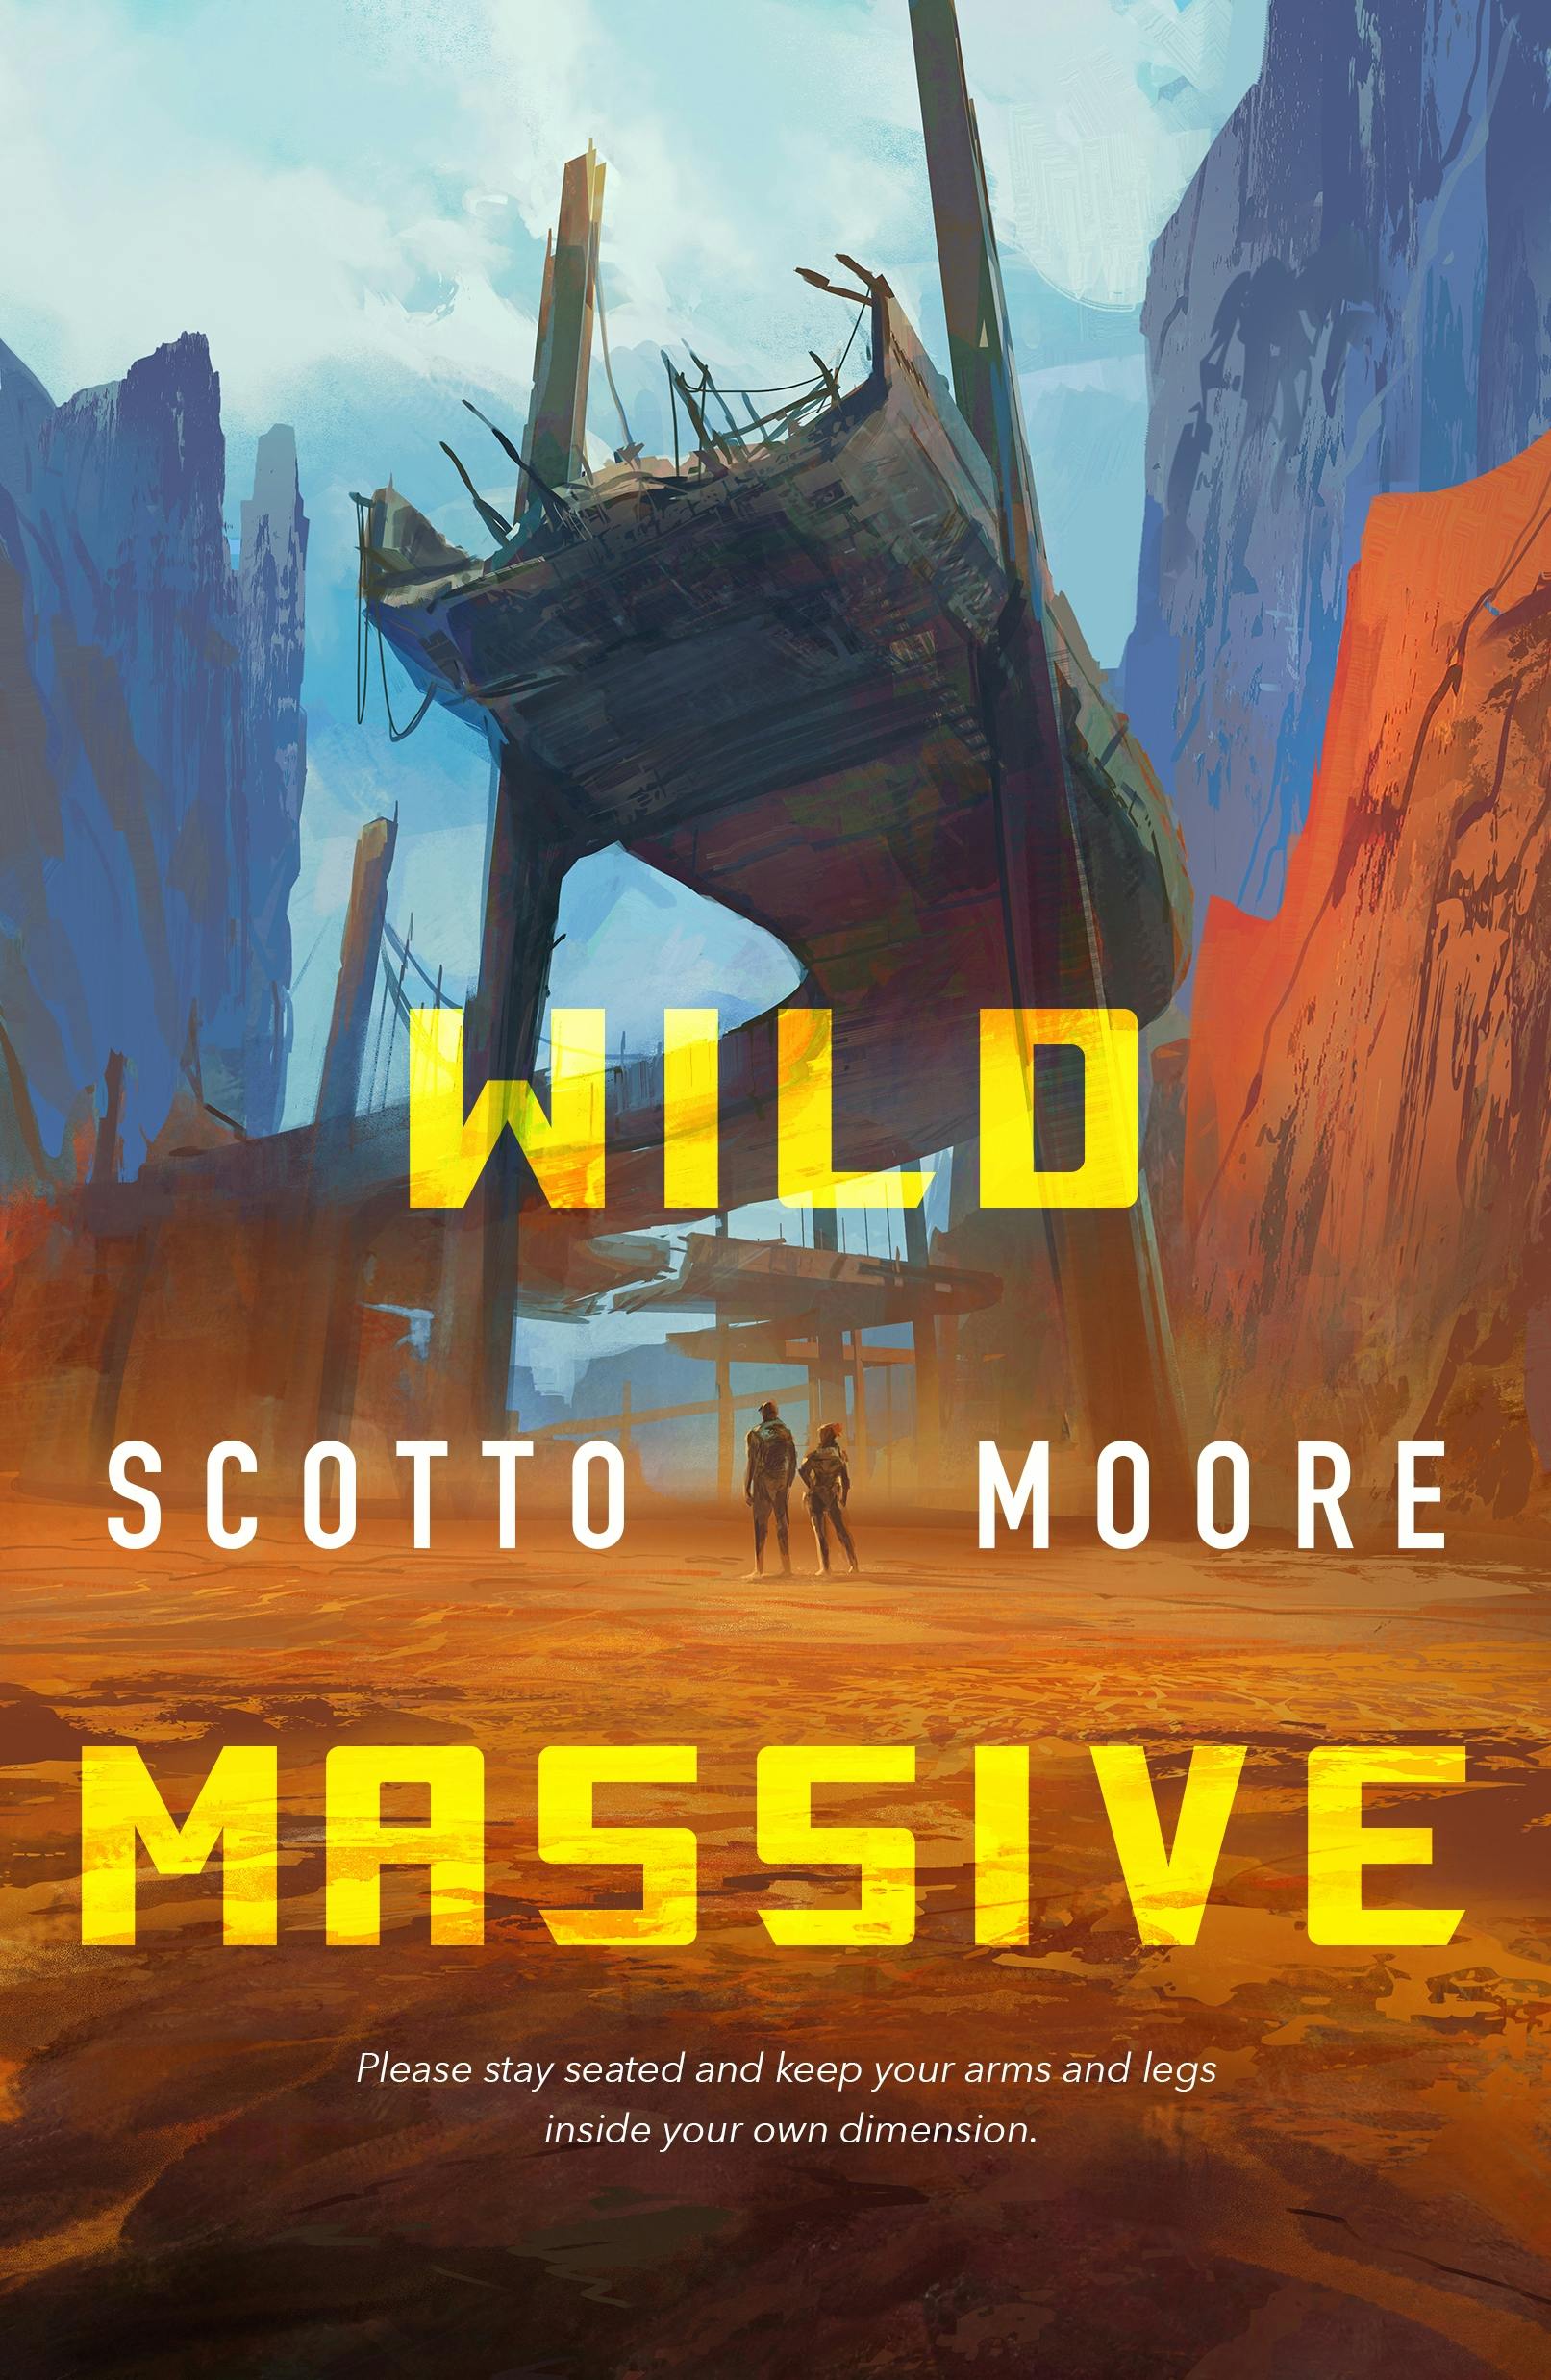 Cover for the book titled as: Wild Massive